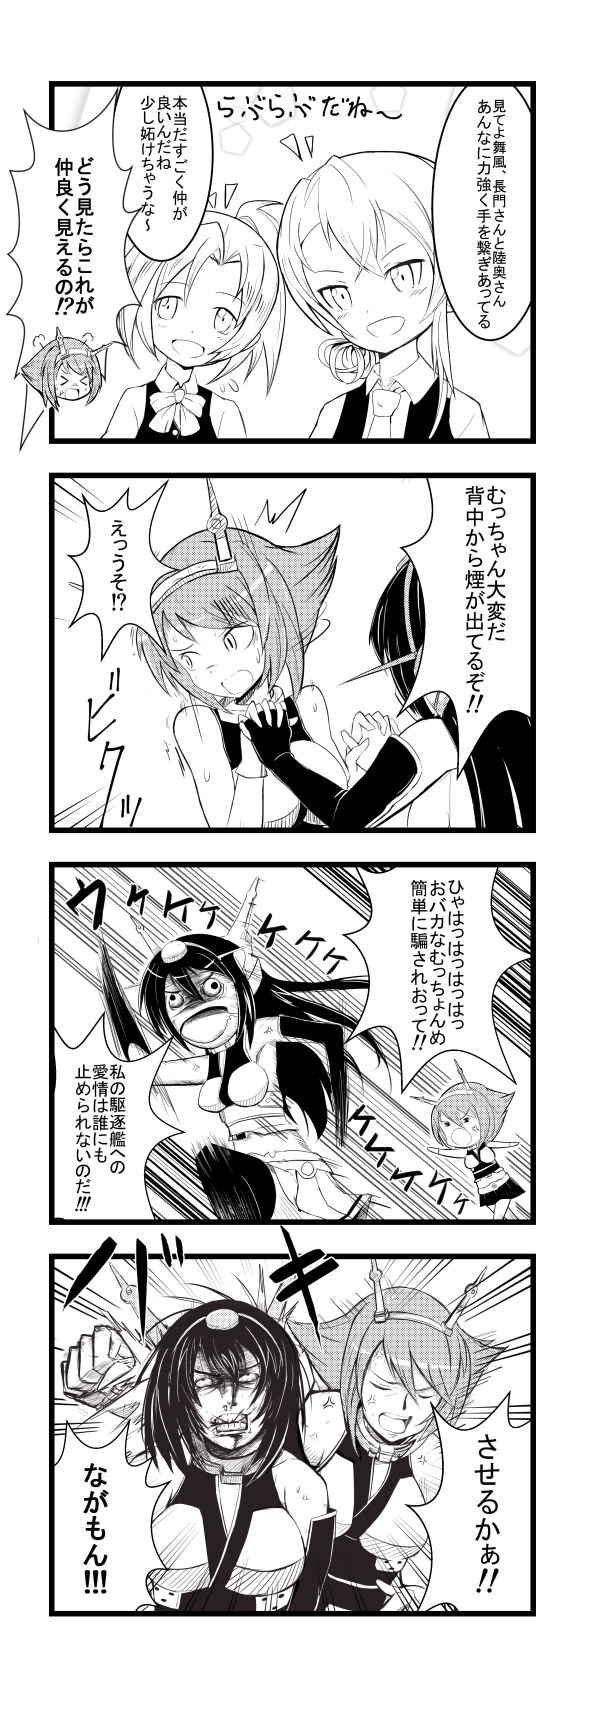 4girls 4koma 51_(akiduki) chasing comic hands_together highres maikaze_(kantai_collection) monochrome multiple_girls mutsu_(kantai_collection) nagato_(kantai_collection) nowaki_(kantai_collection) running translation_request